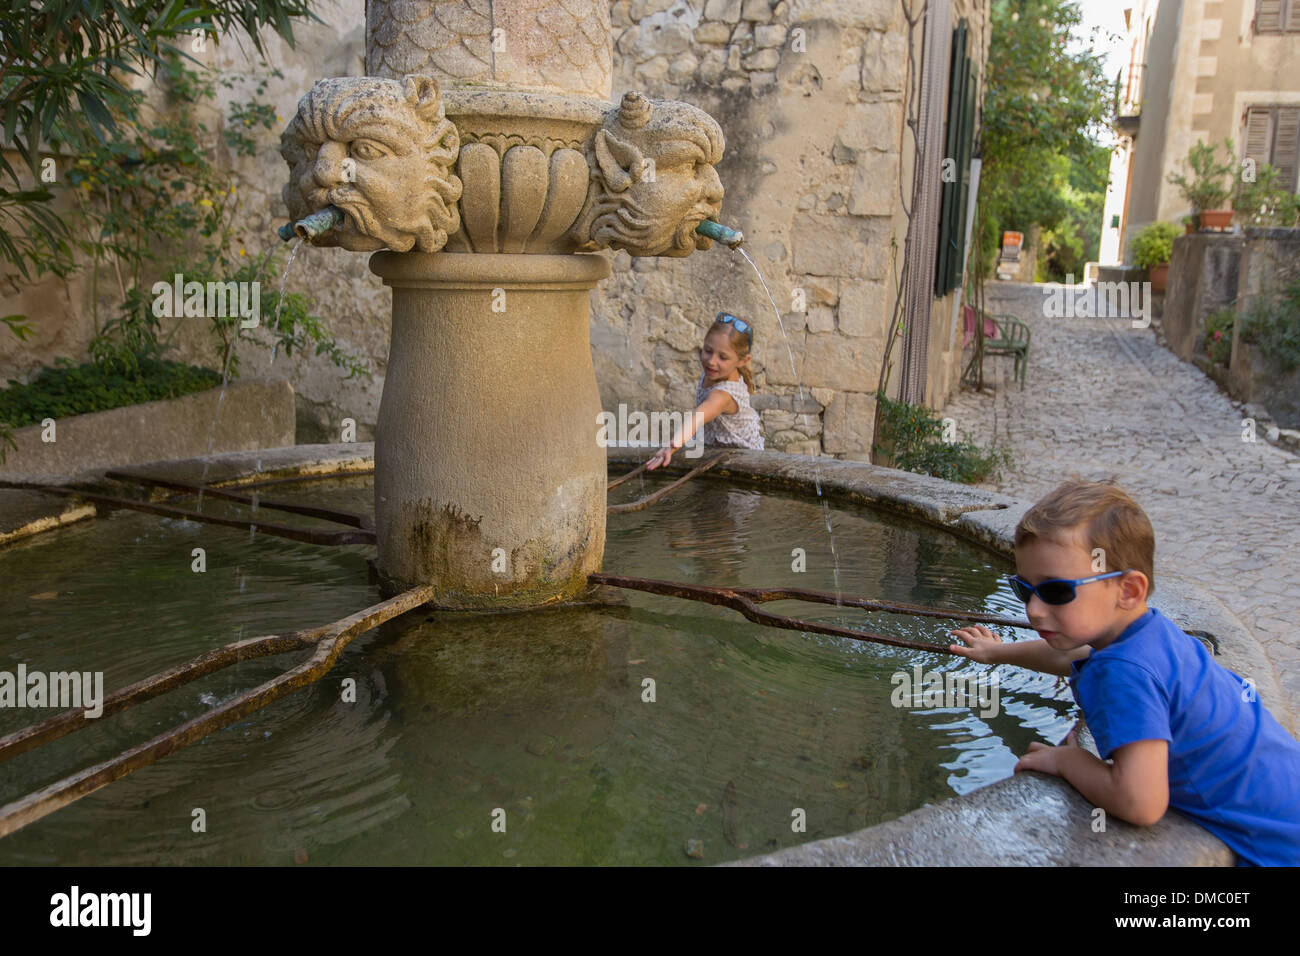 CHILD PLAYING ON THE EDGE OF A FOUNTAIN WITH GARGOYLES, VILLAGE OF SEGURET, LABELLED ONE OF THE MOST BEAUTIFUL VILLAGES OF FRANCE, VAUCLUSE (84), FRANCE Stock Photo